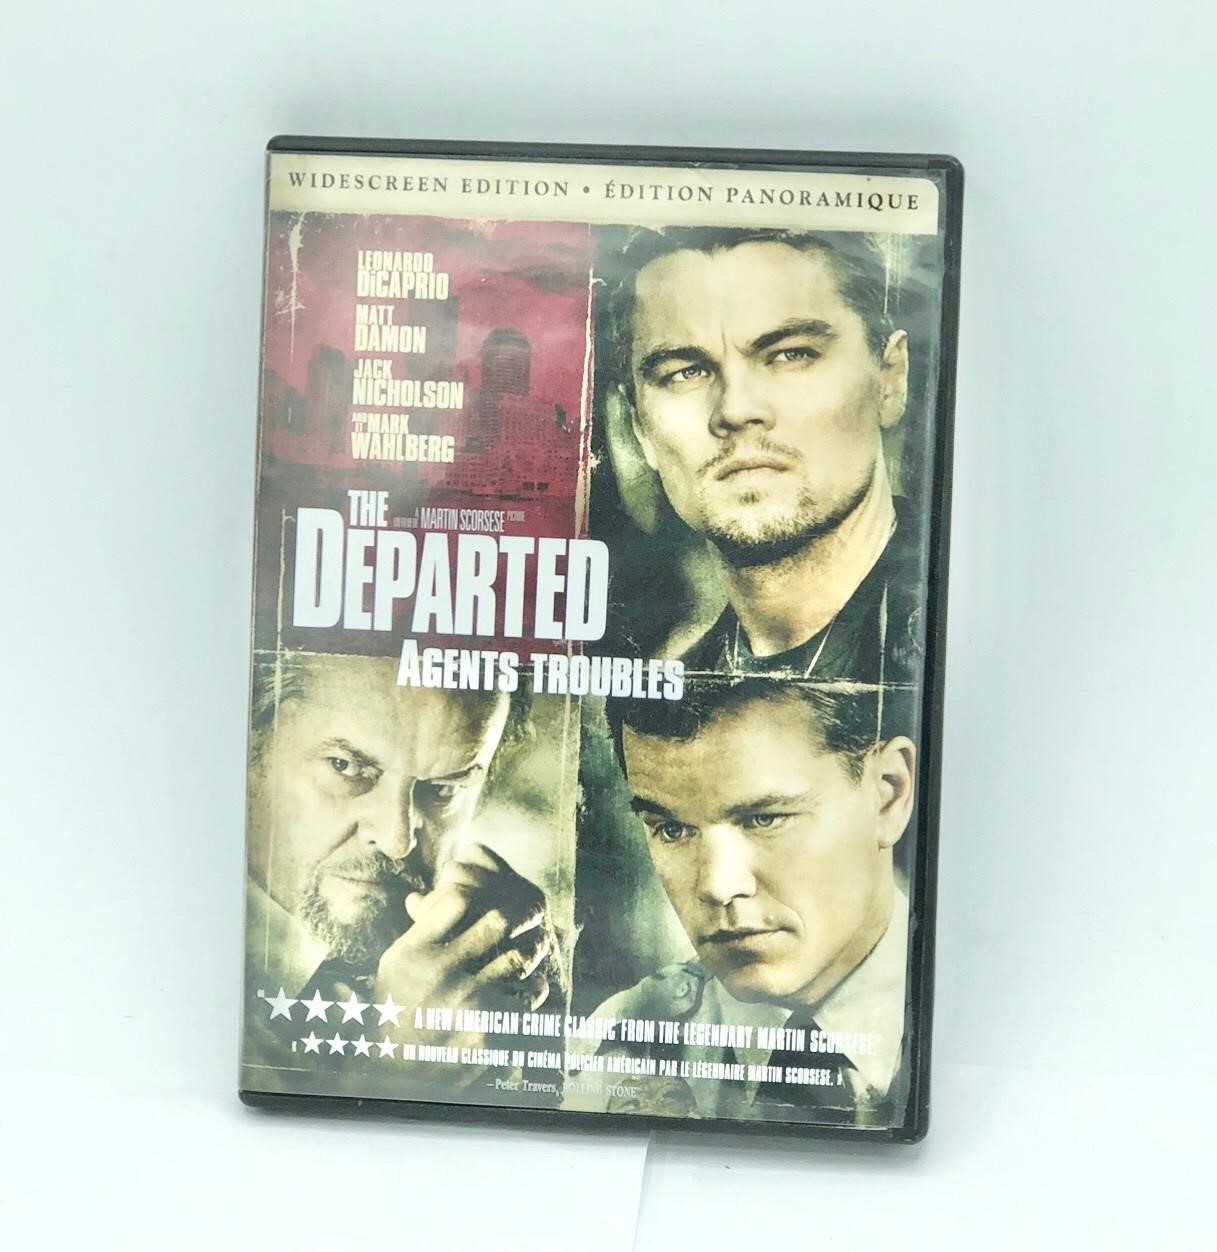 The Departed agents troubles previously viewed